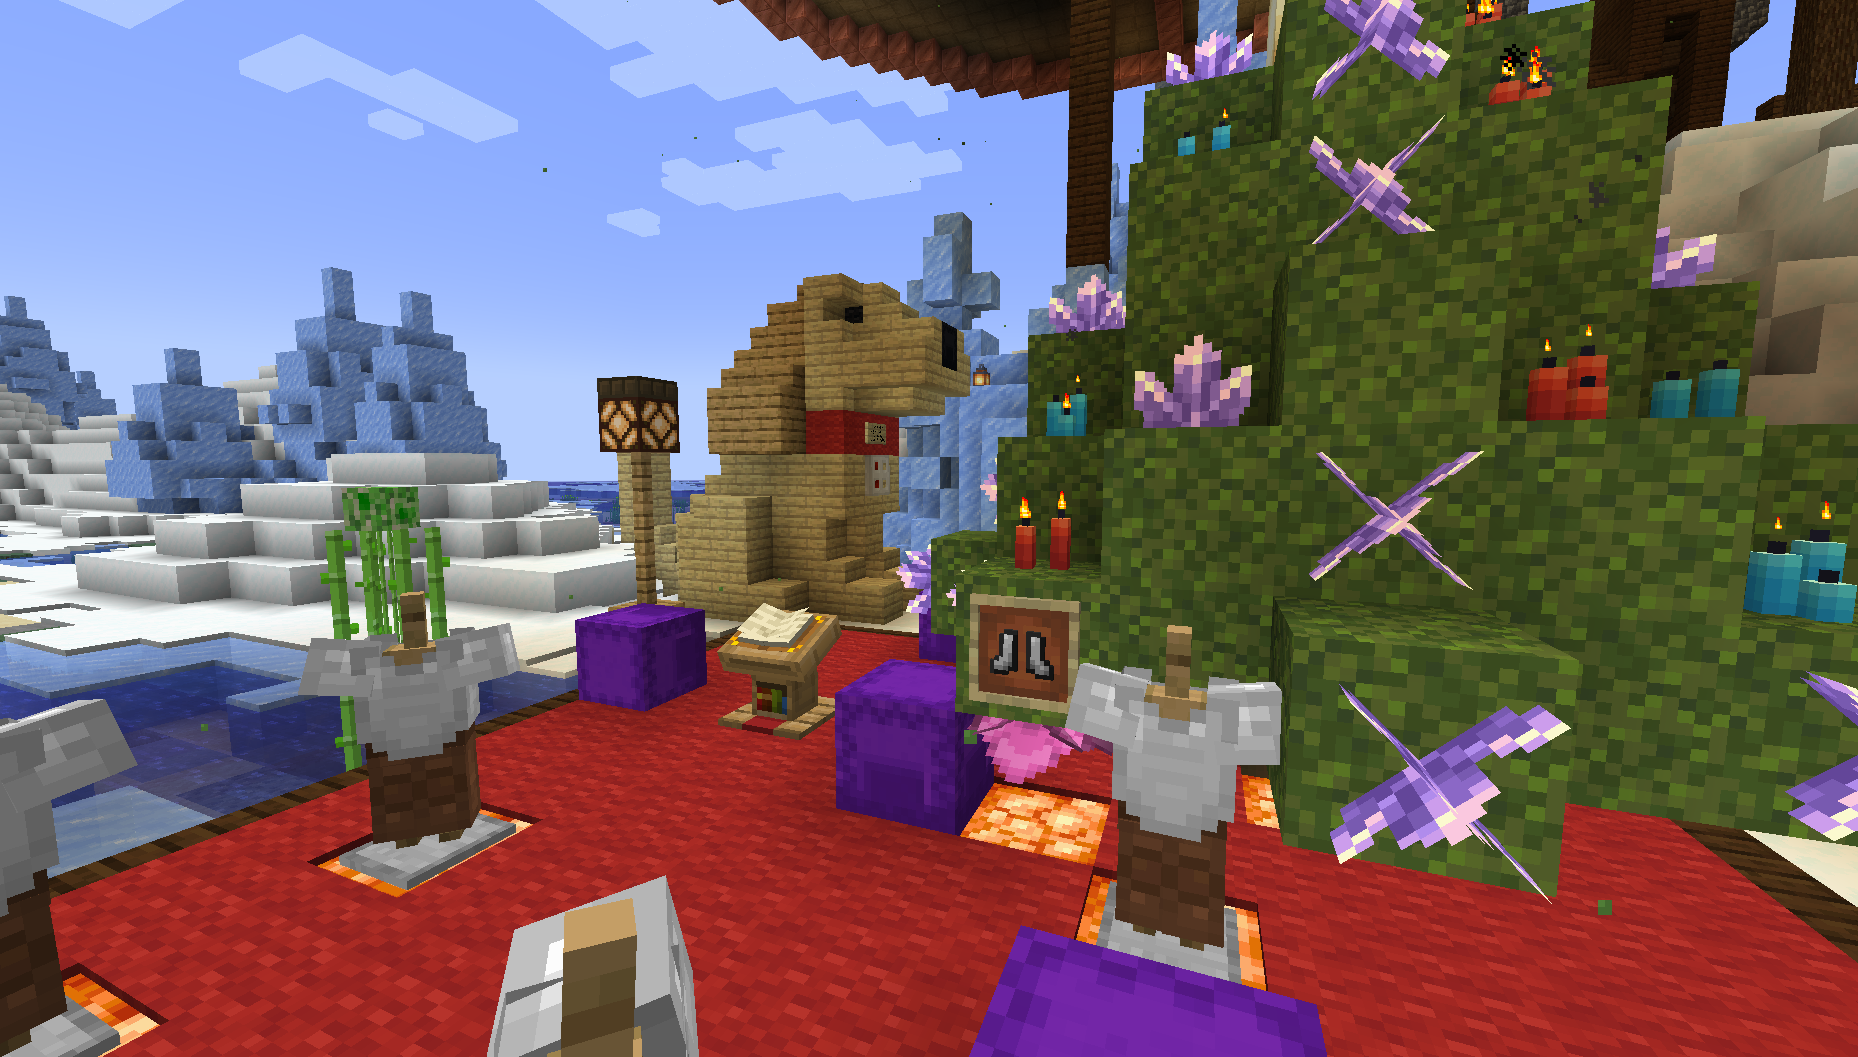 A construction of a cockapoo dog in Minecraft in the background with a Christmas tree in the foreground